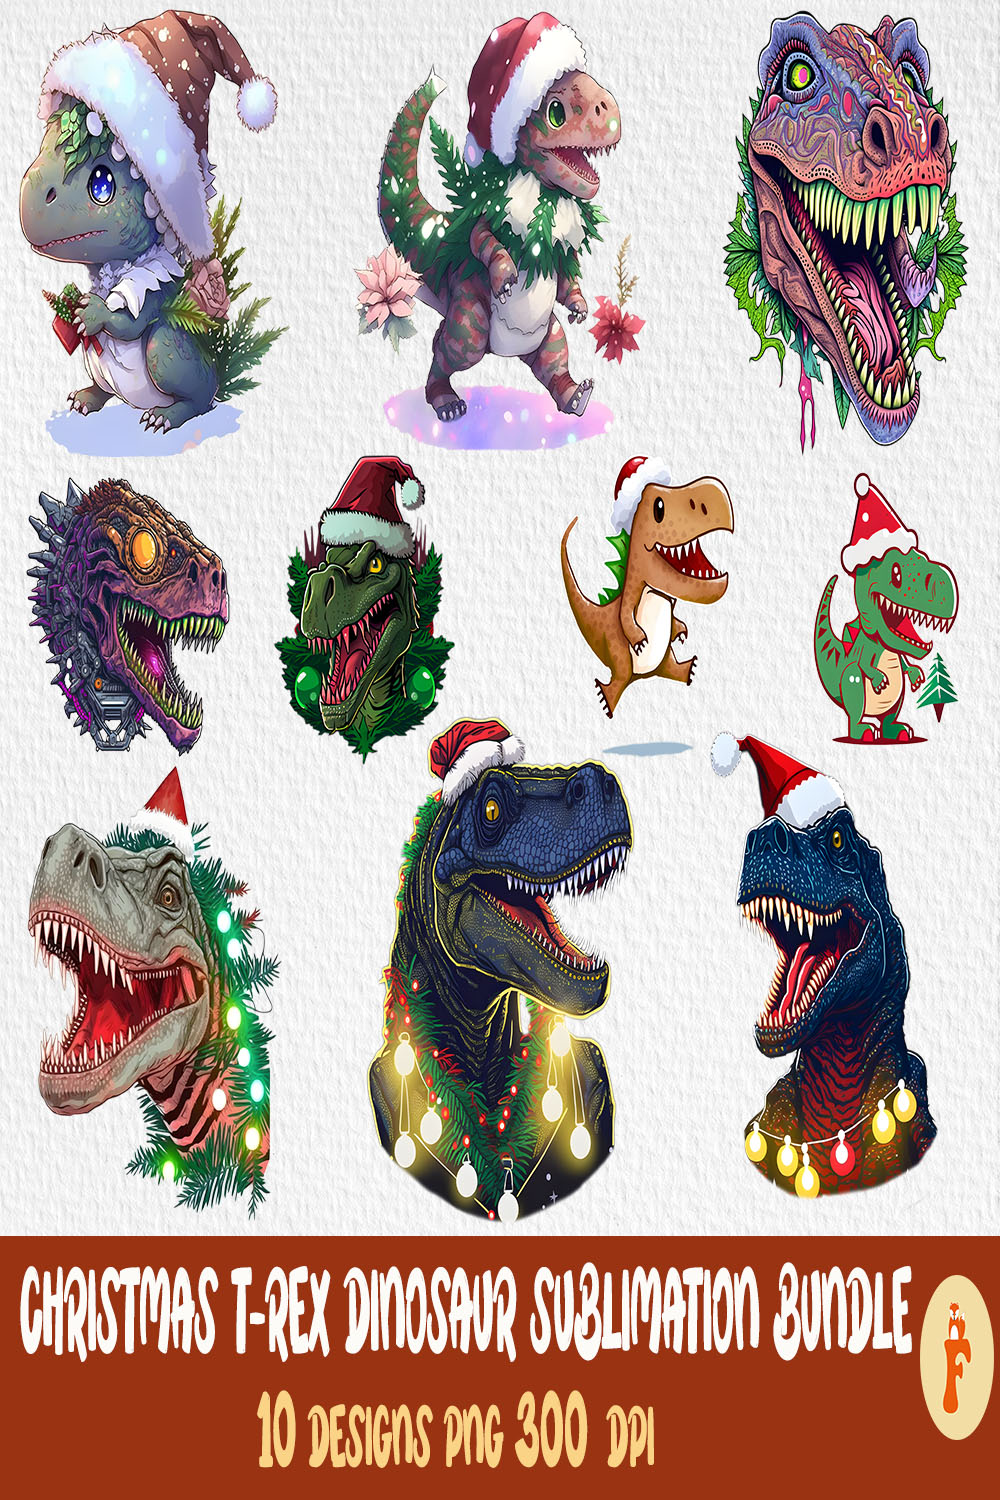 Pack of colorful images of dinosaurs in Santa's hat.